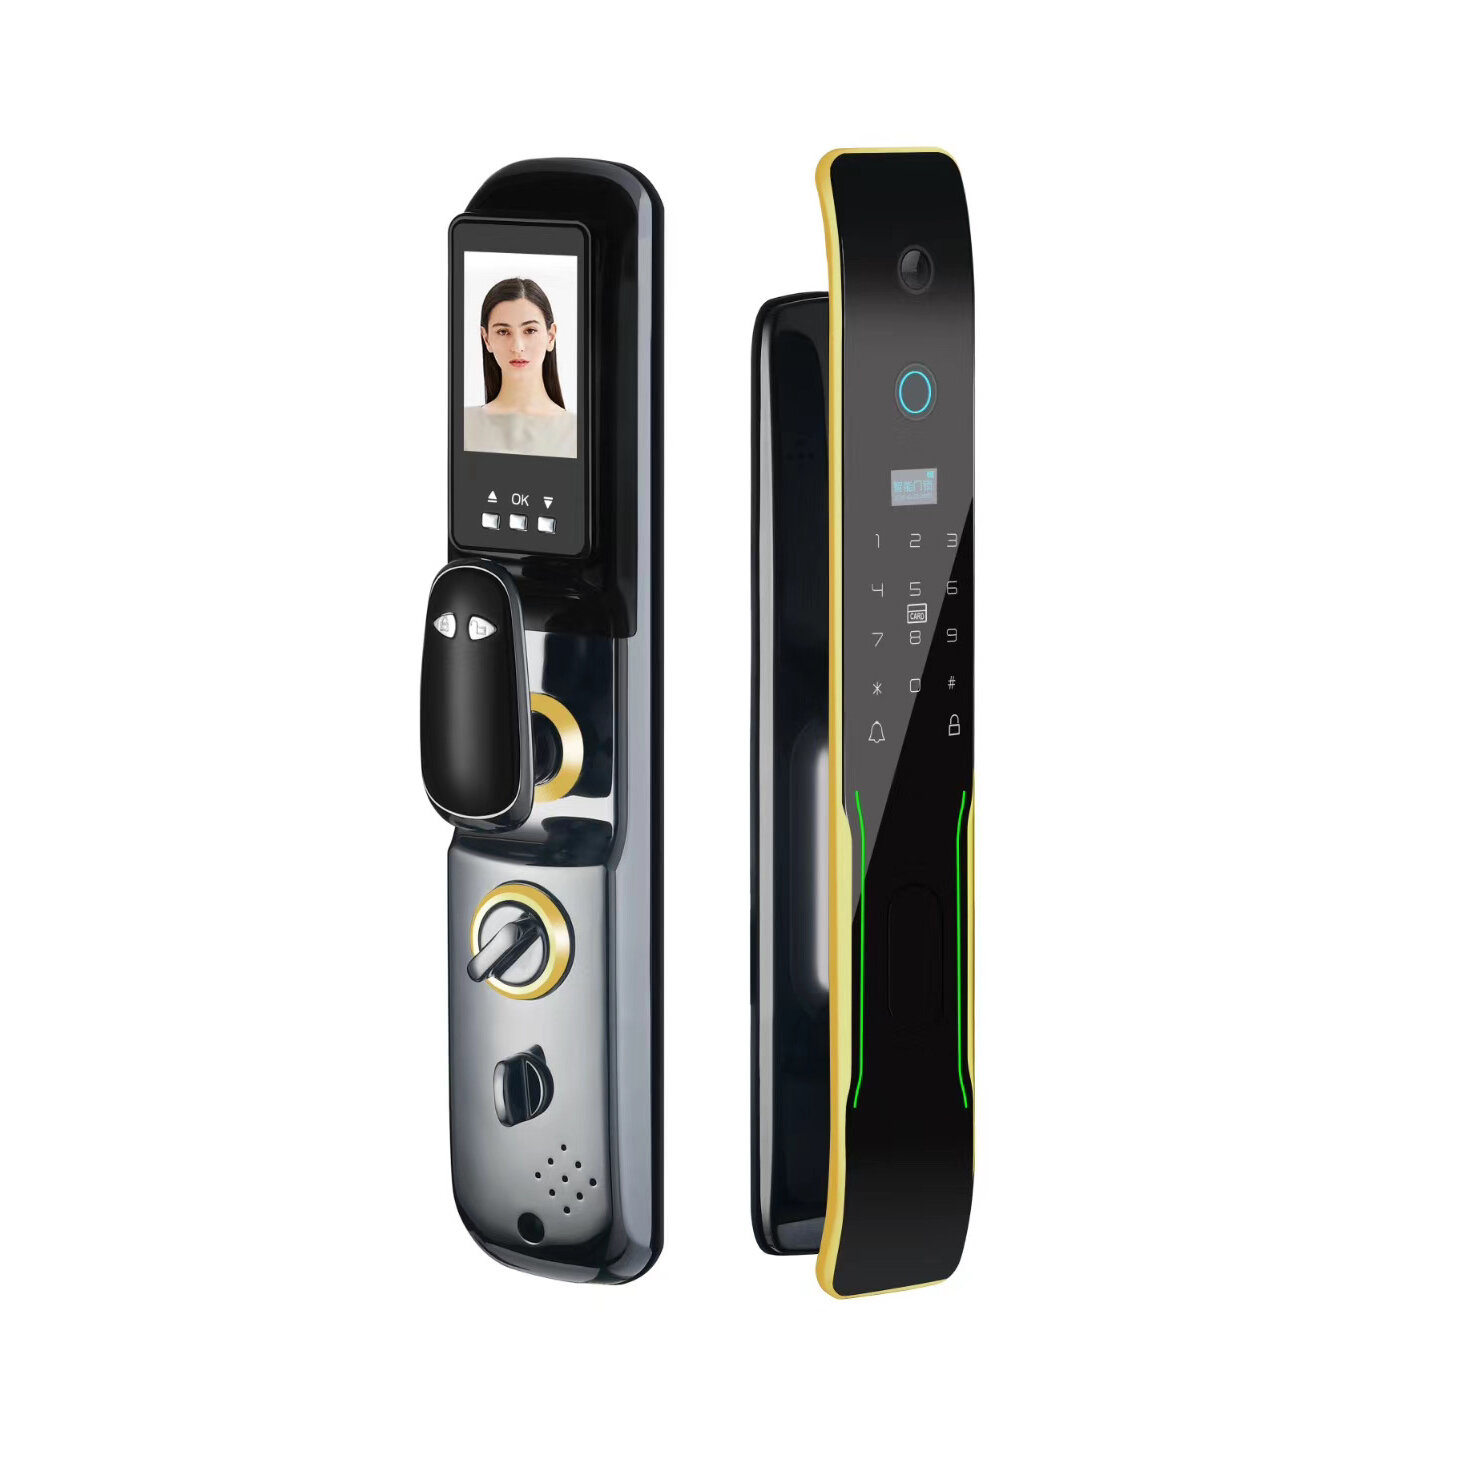 Details about   Smart Home Door Lock Entry IOS/Android Biometric Fingerprint Electric Handle 